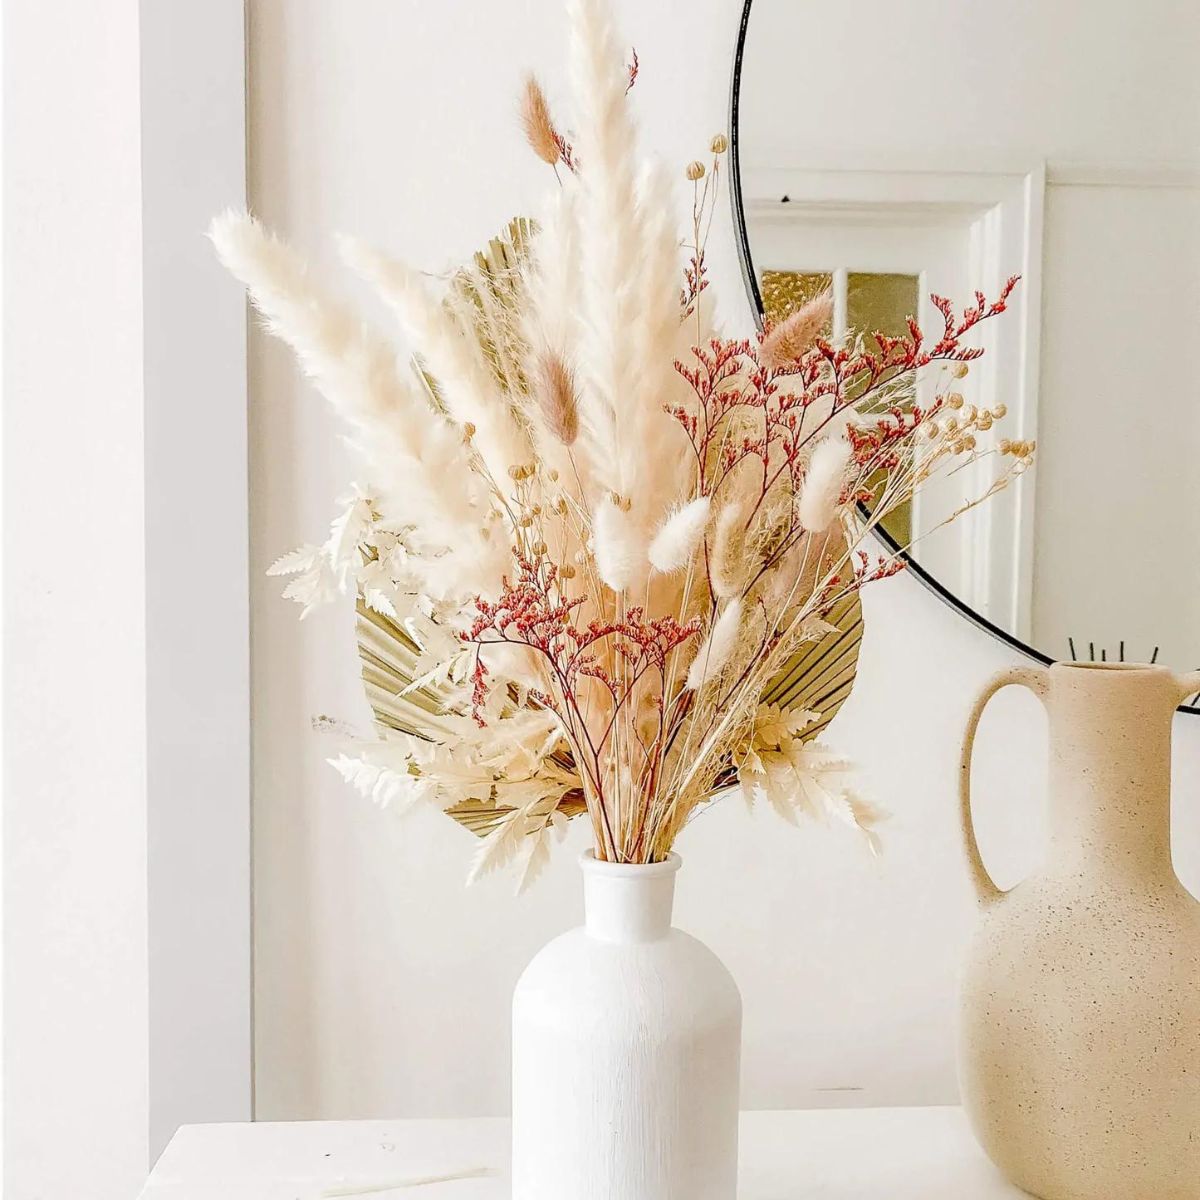 How To Decorate With Pampas Grass